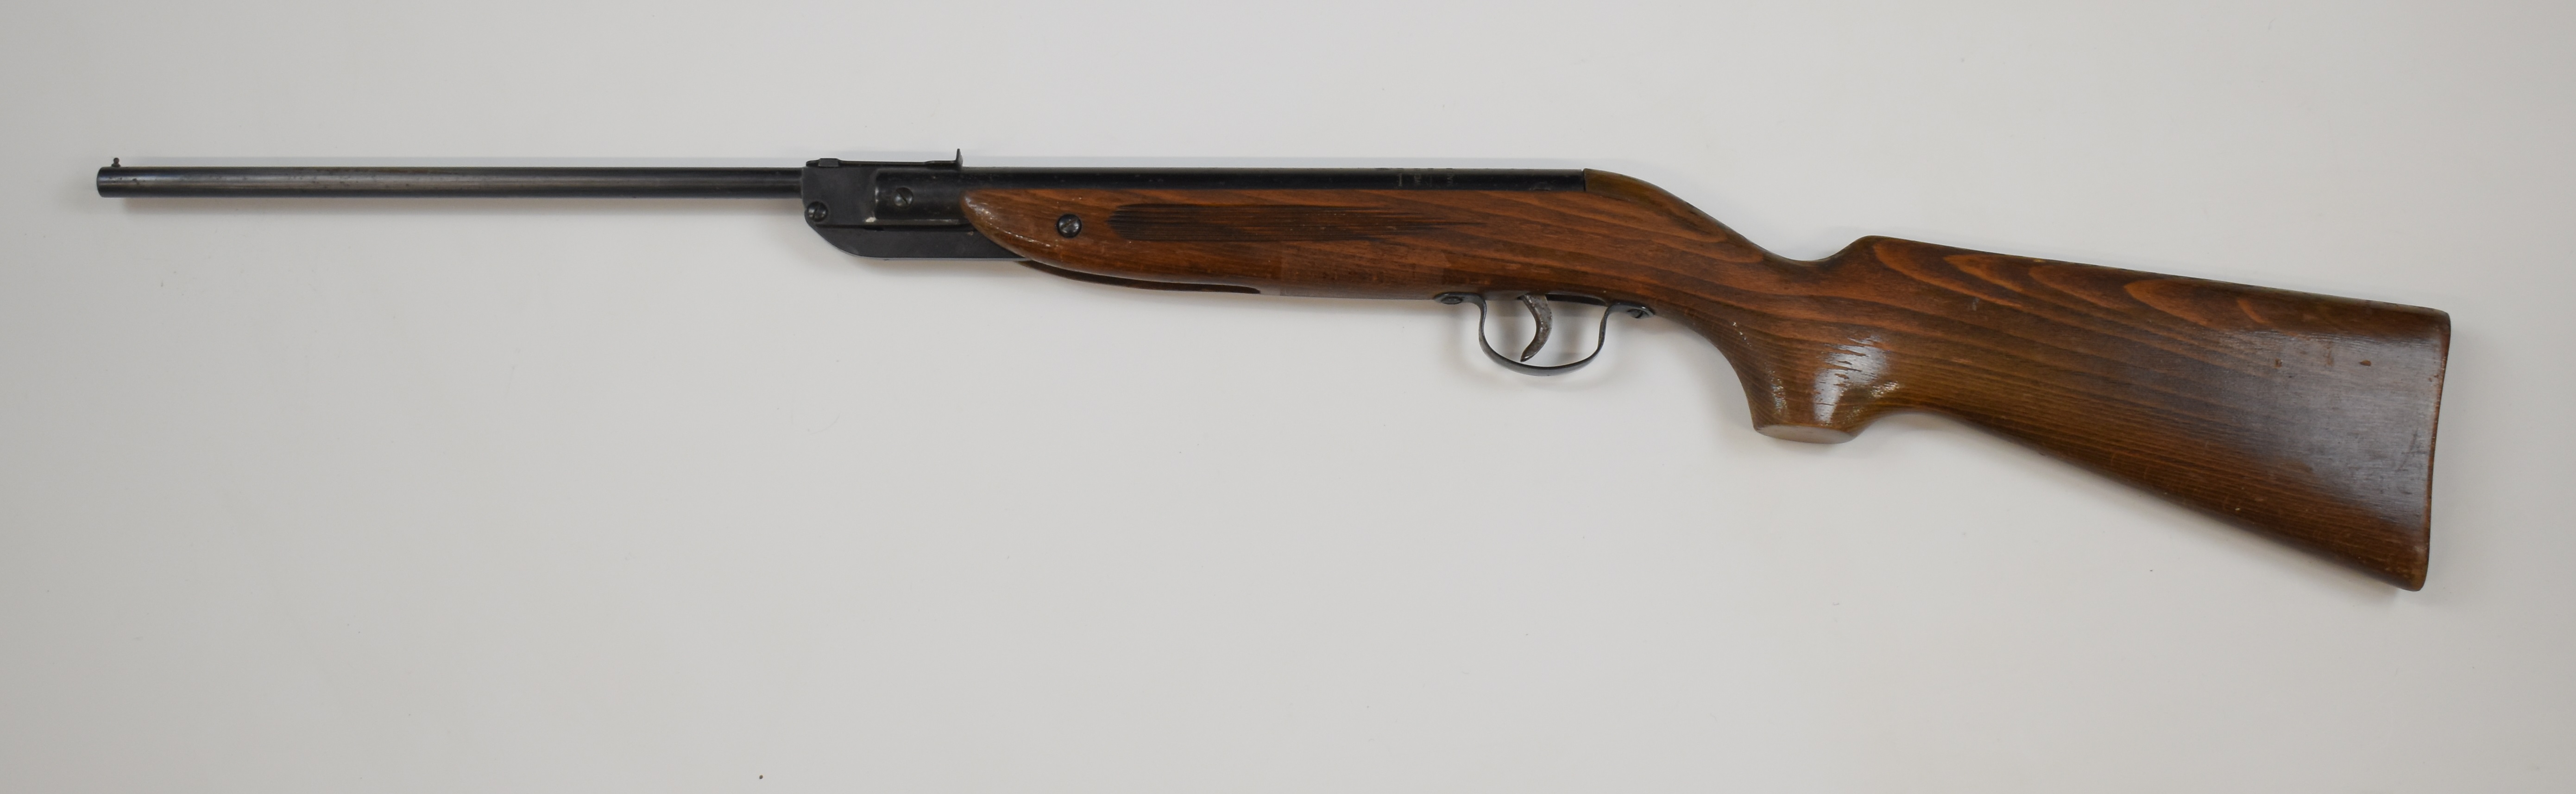 Webley Ranger .177 air rifle with semi-pistol grip and adjustable sights, NVSN, in original box. - Image 6 of 8